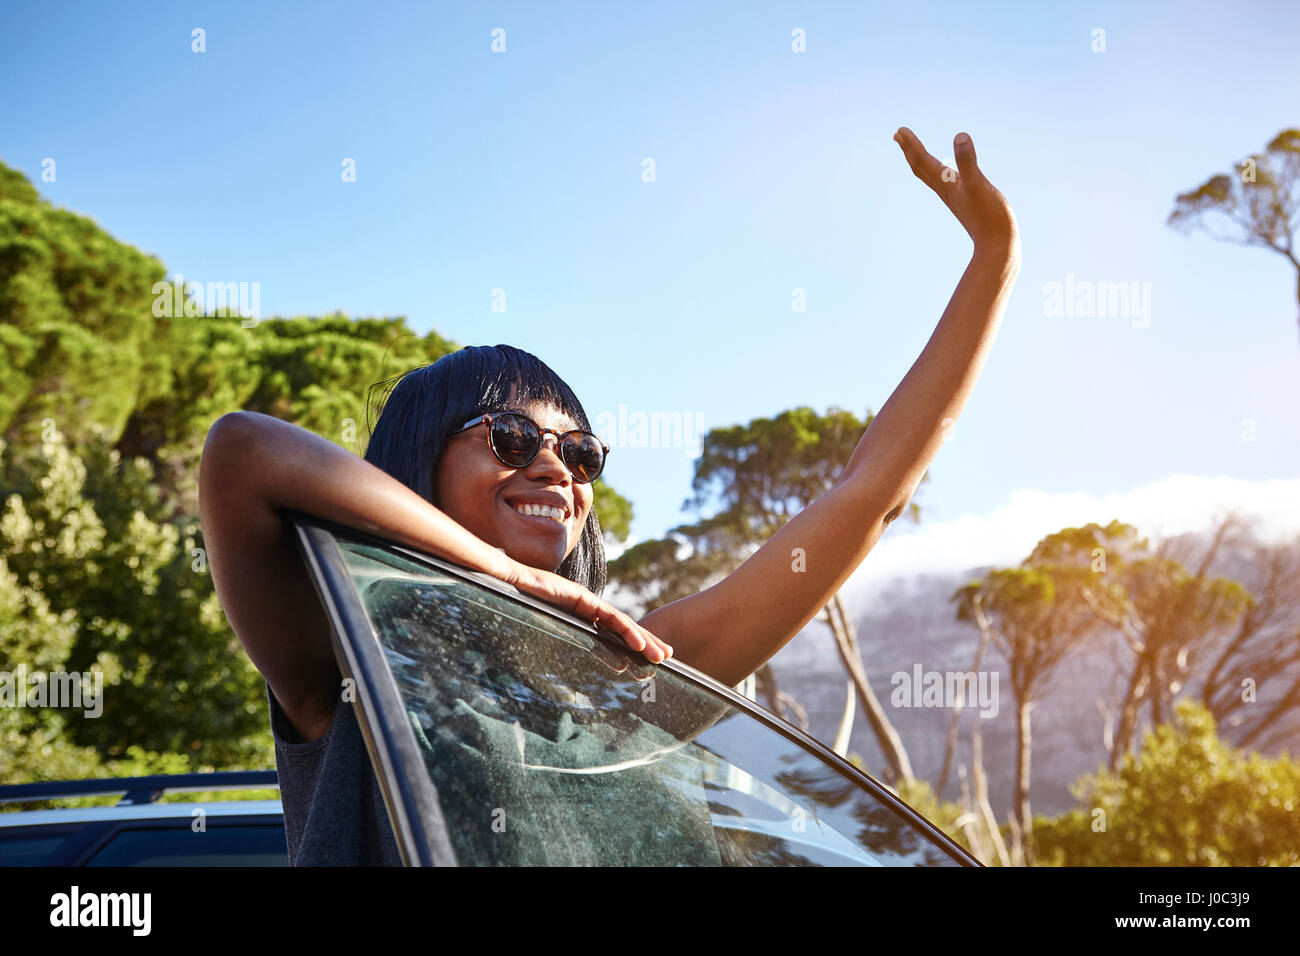 Portrait of young woman standing beside car, leaning on open car door, waving Stock Photo